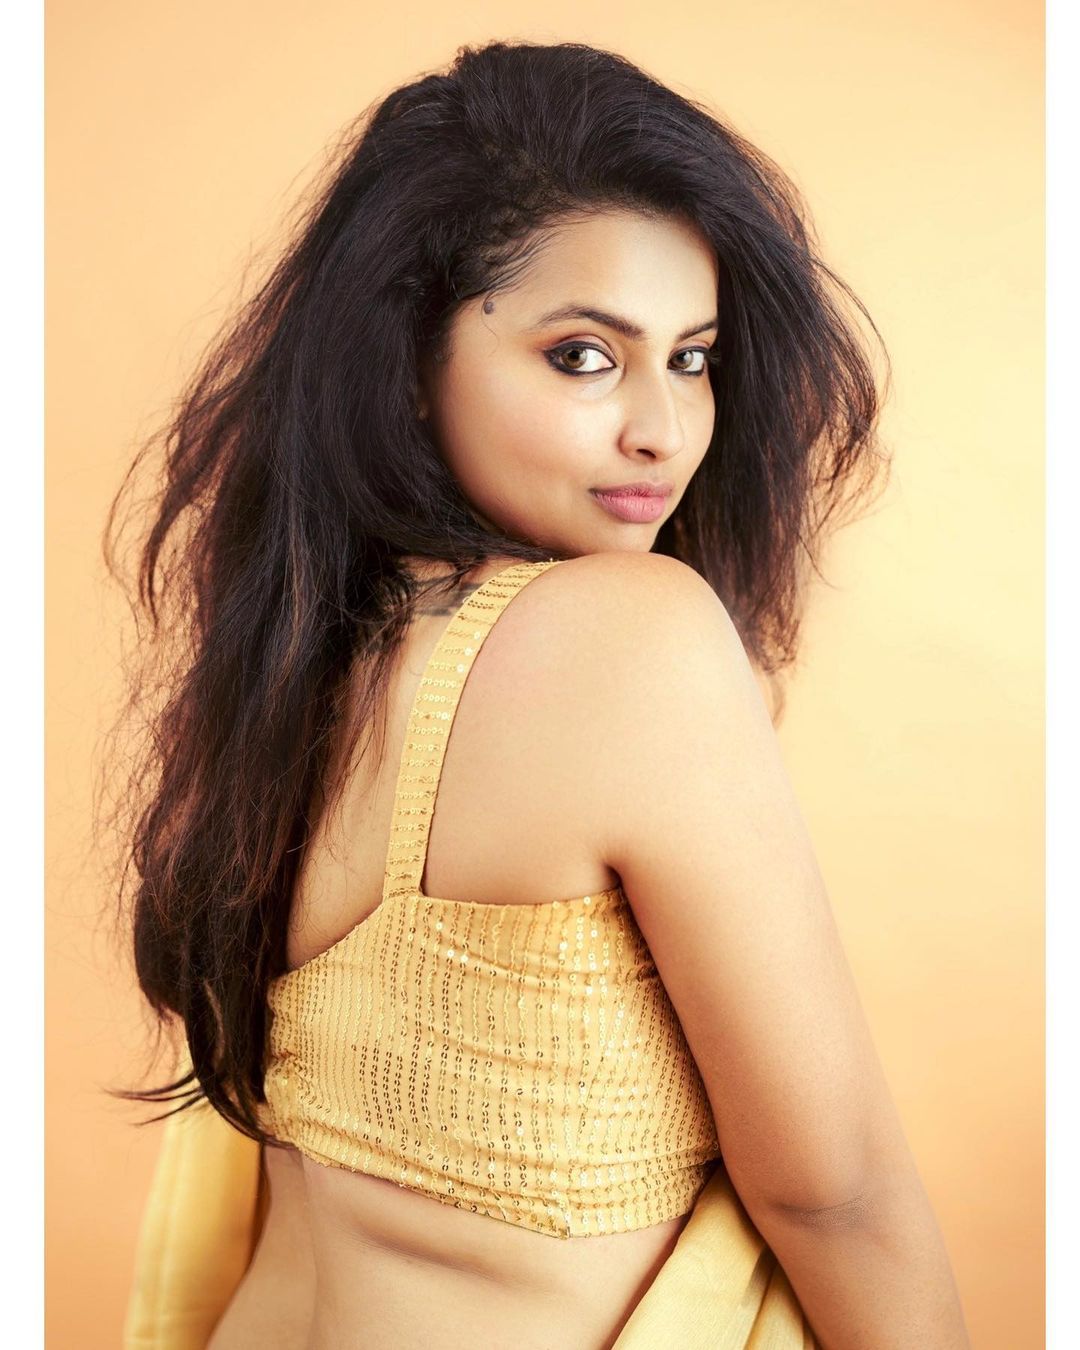 Anicka Vikramman Flaunts her Hourglass Figure In a Yellow Saree on Instagram (View Pics)